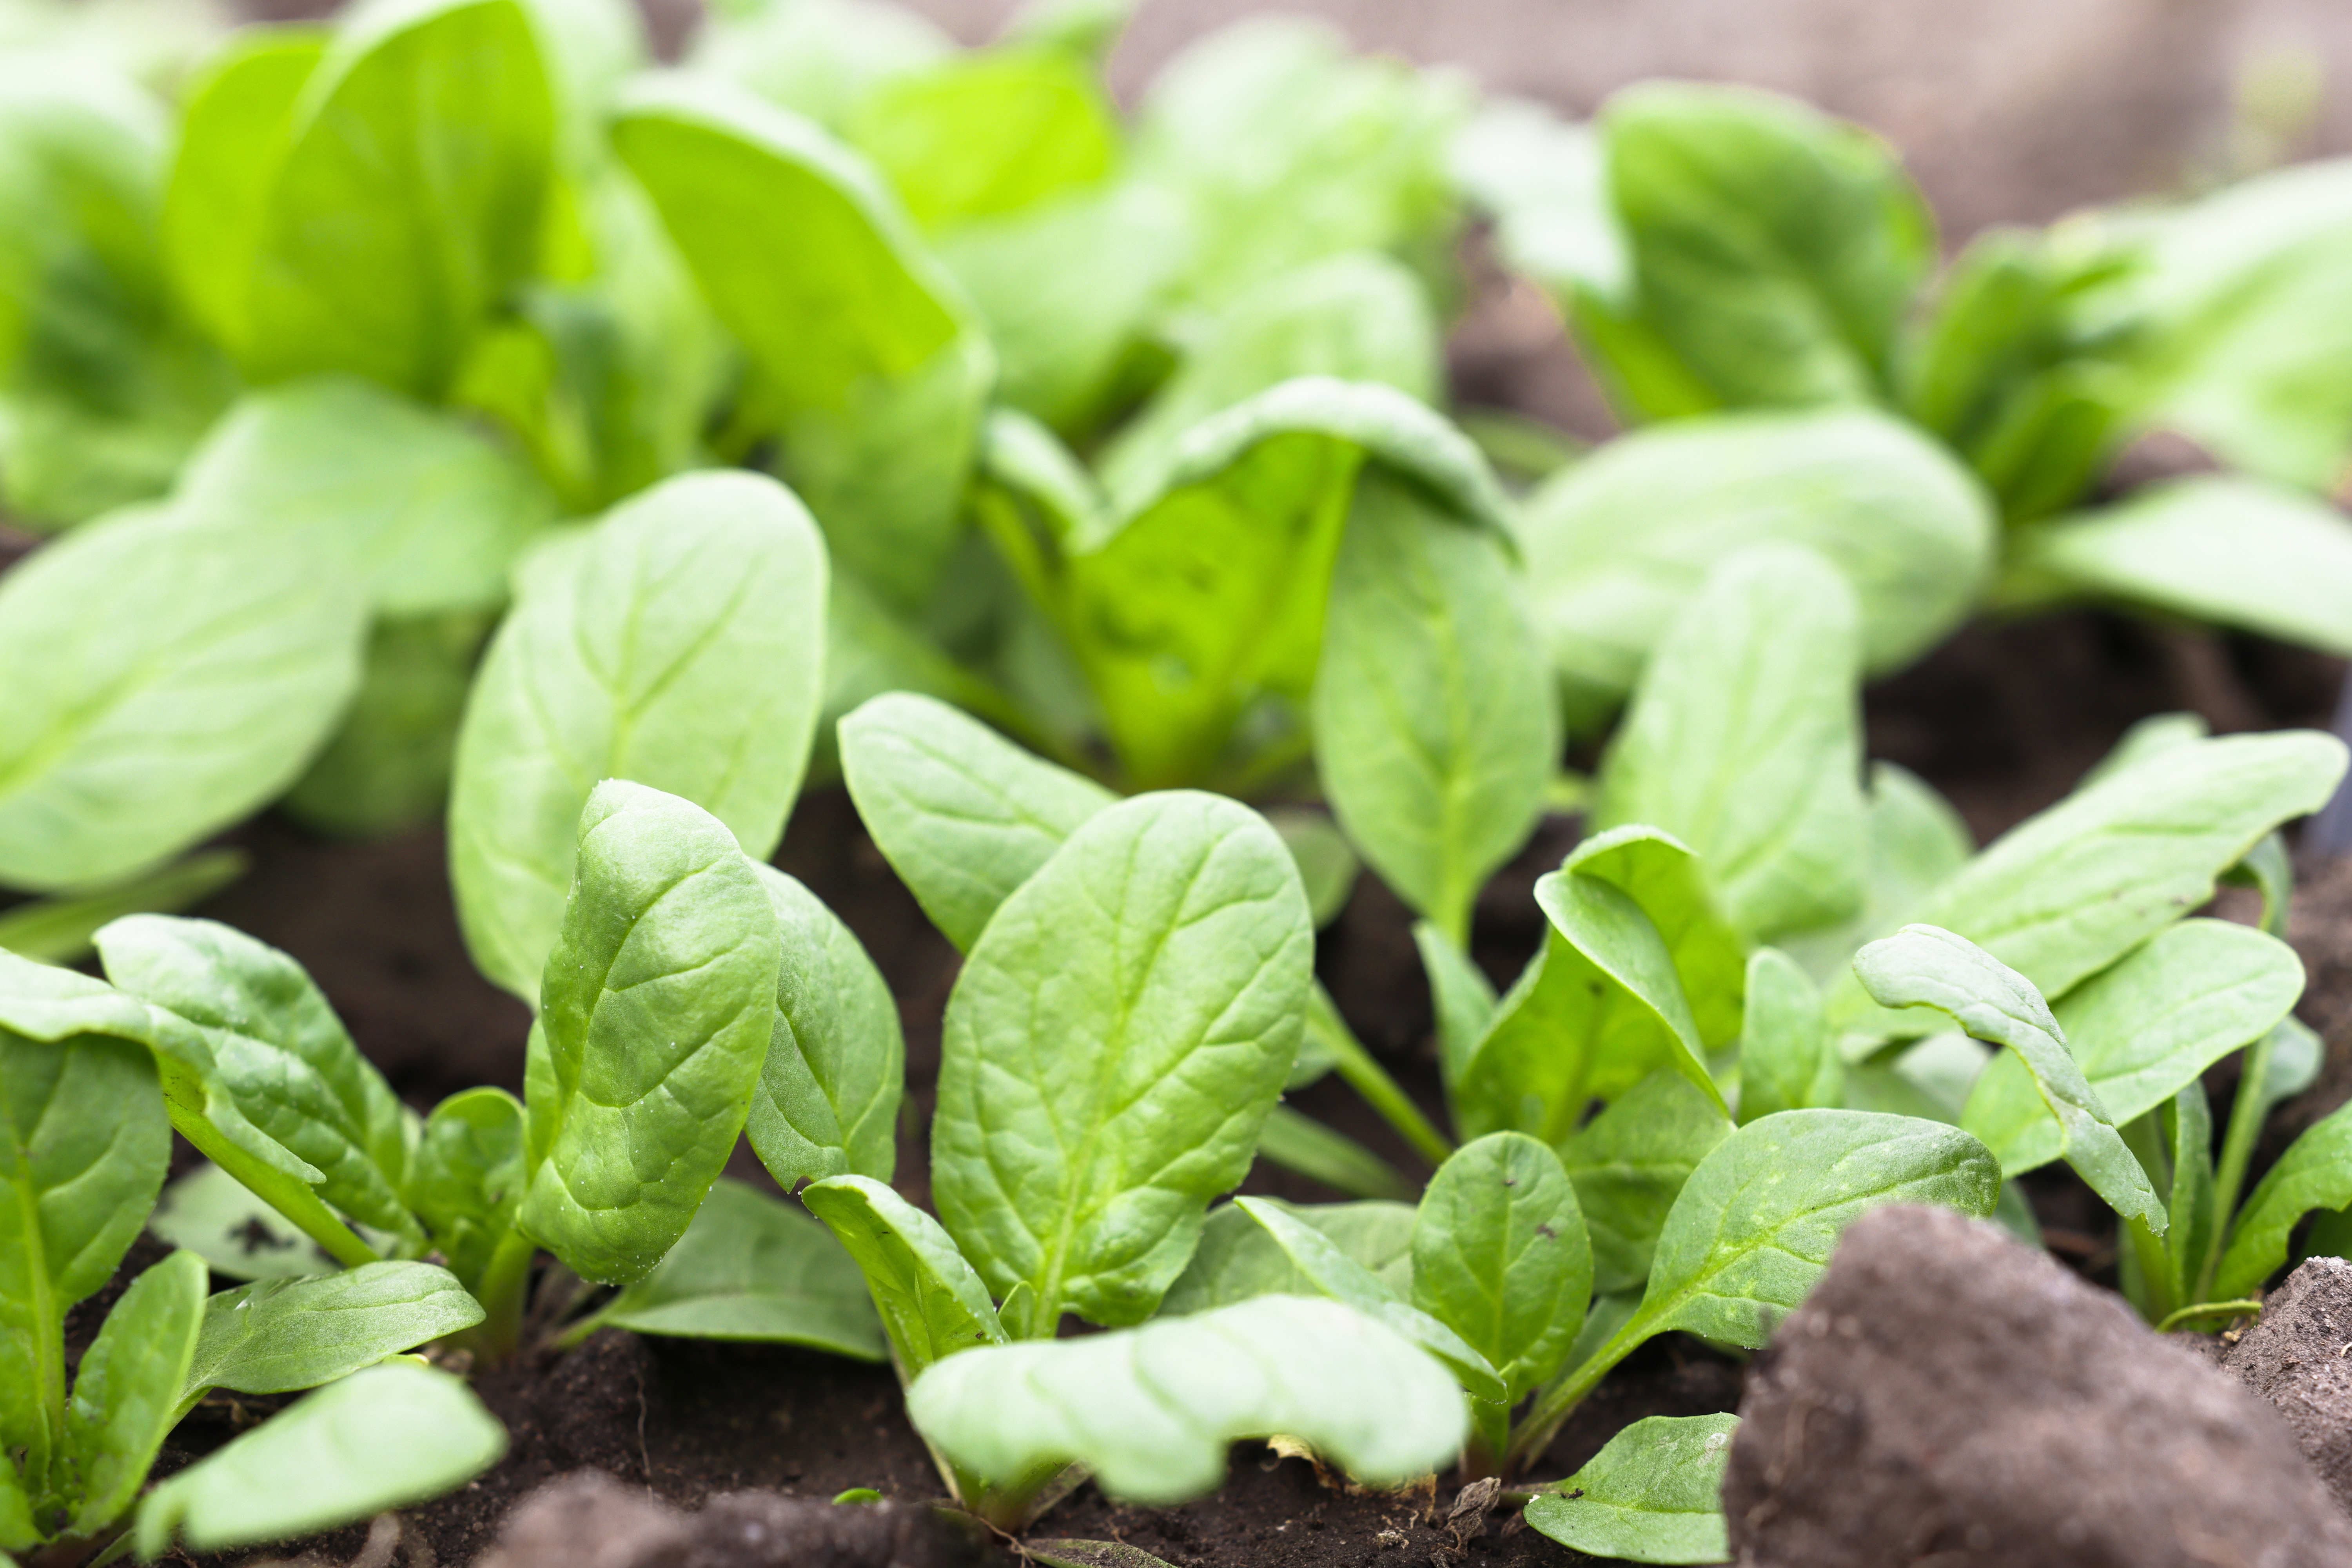 Young spinach plants in the garden